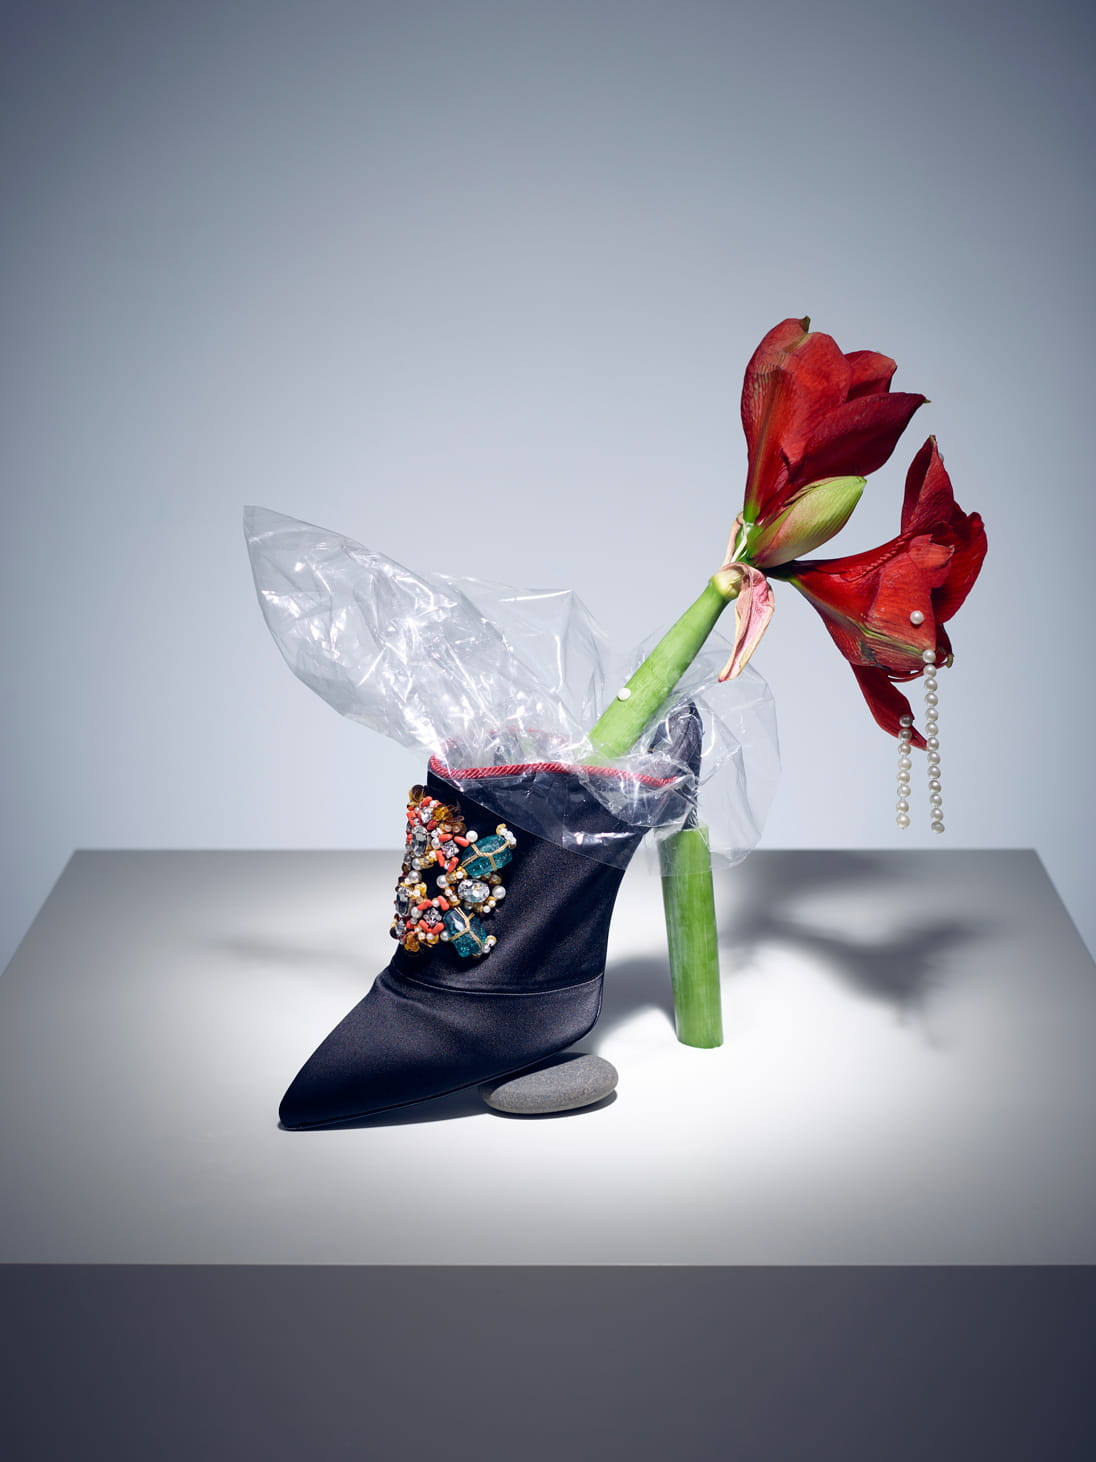 Available exclusively at Pacific Place, Roger Vivier’s bejewelled heeled mules let beauty blossom from the feet up